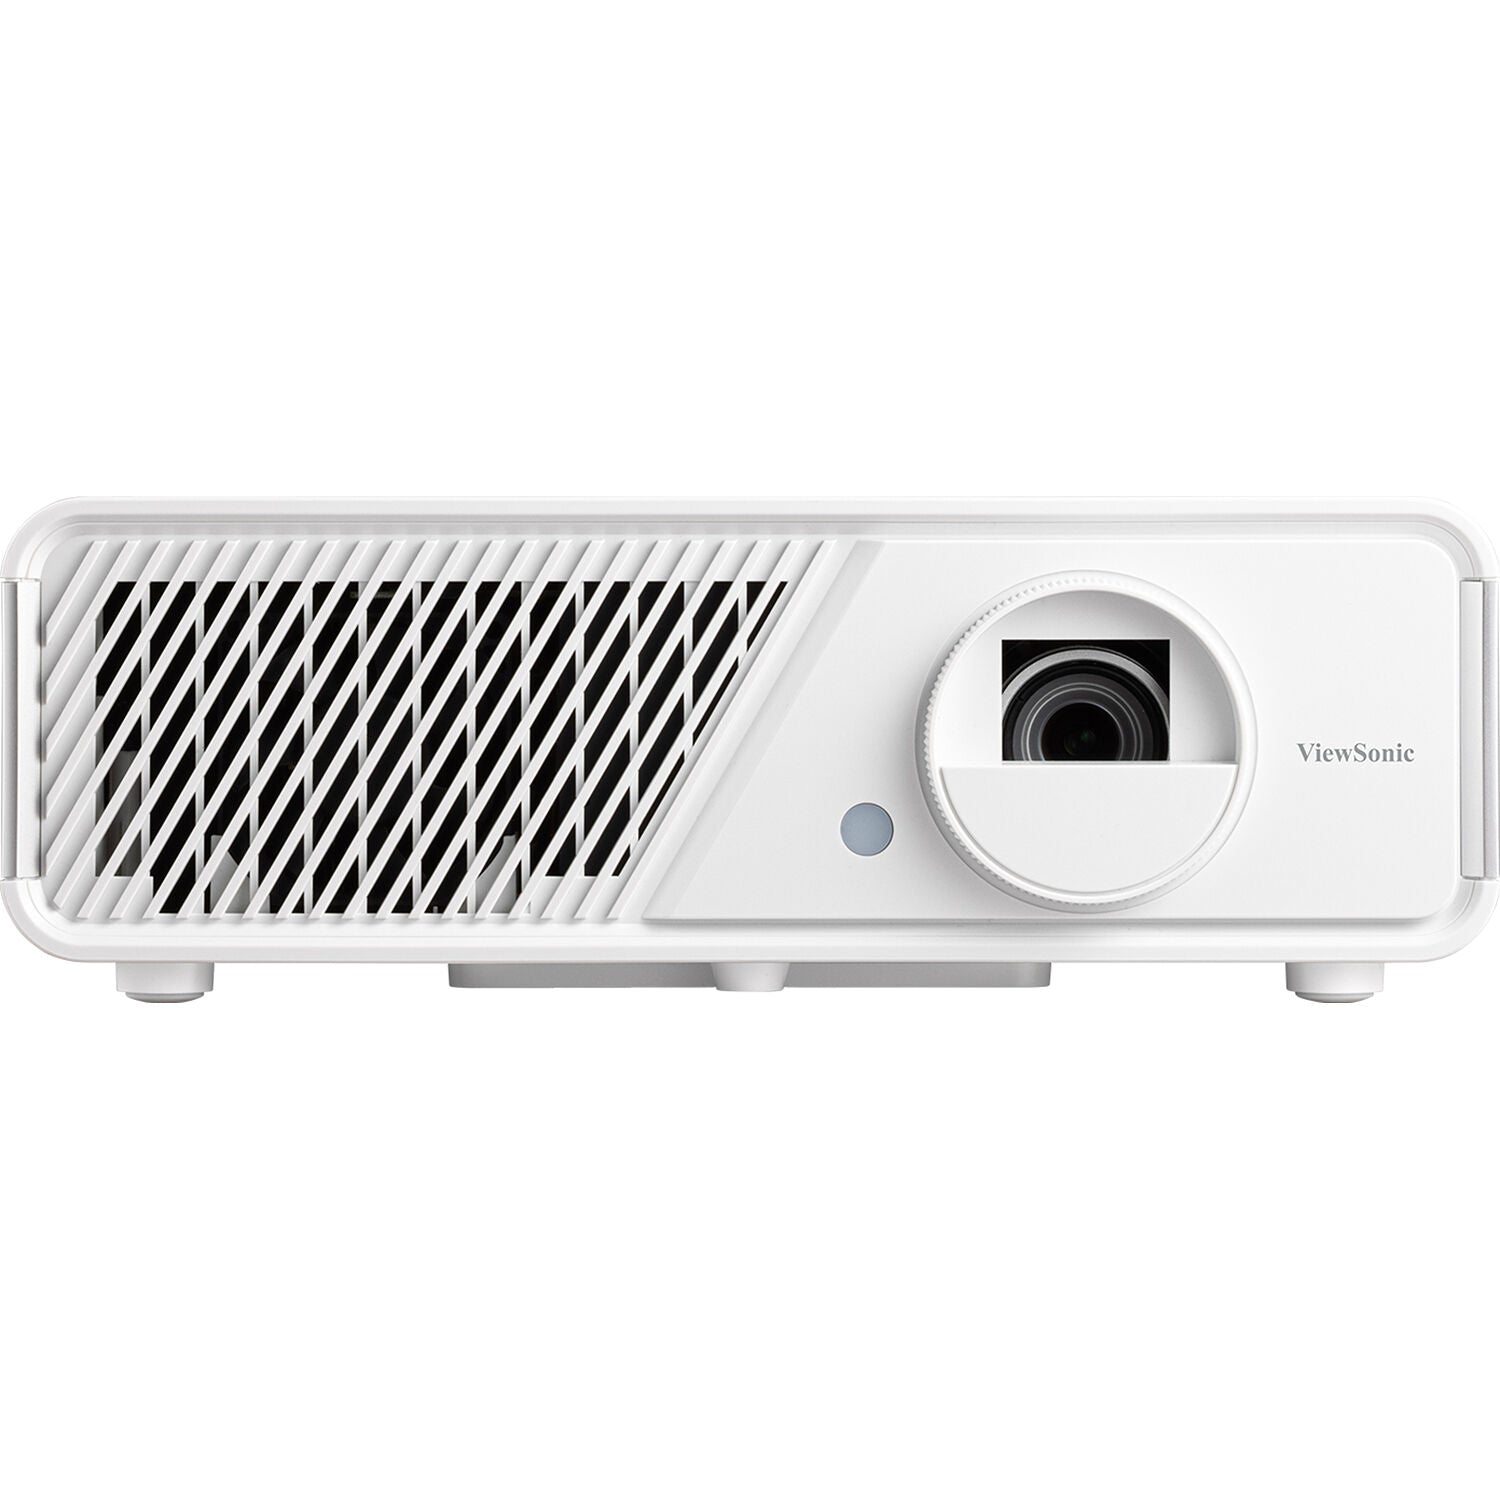 ViewSonic X1-S 1080p 3100 LED Lumens Projector - Certified Refurbished